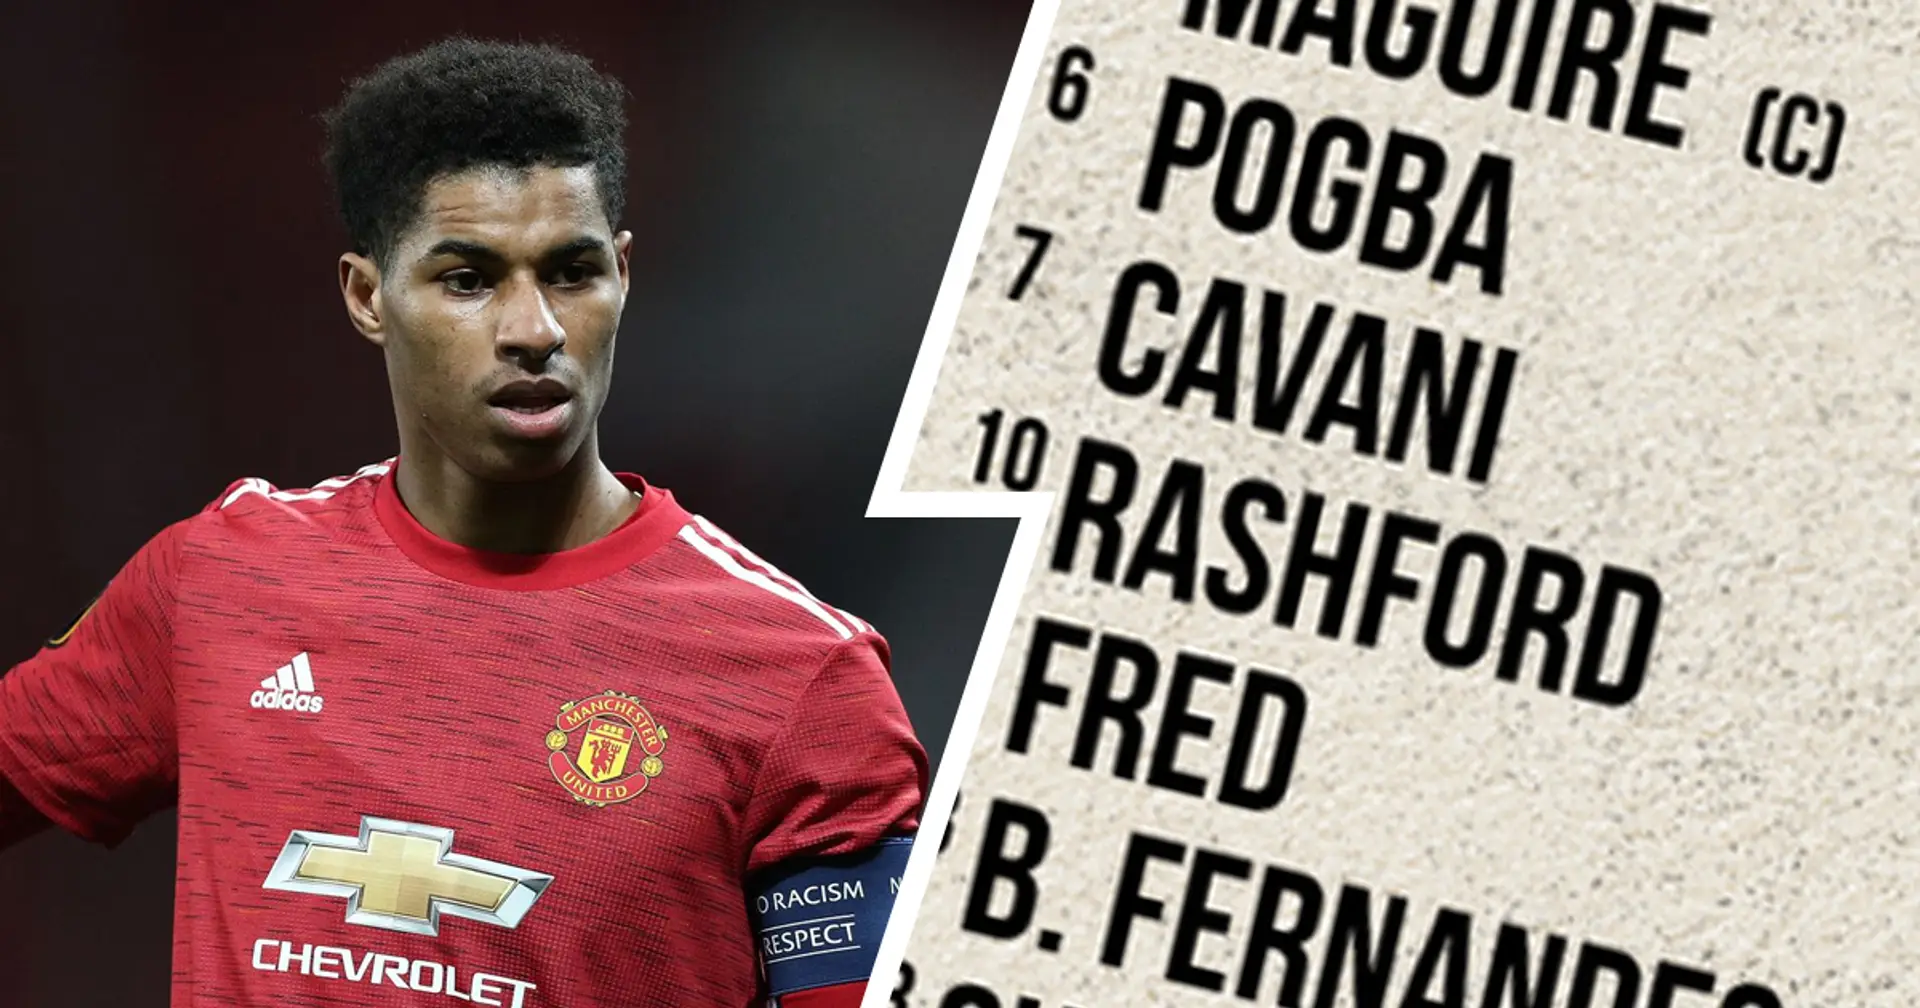 Rashford still in: Man United's expected 20-man squad for Liverpool clash